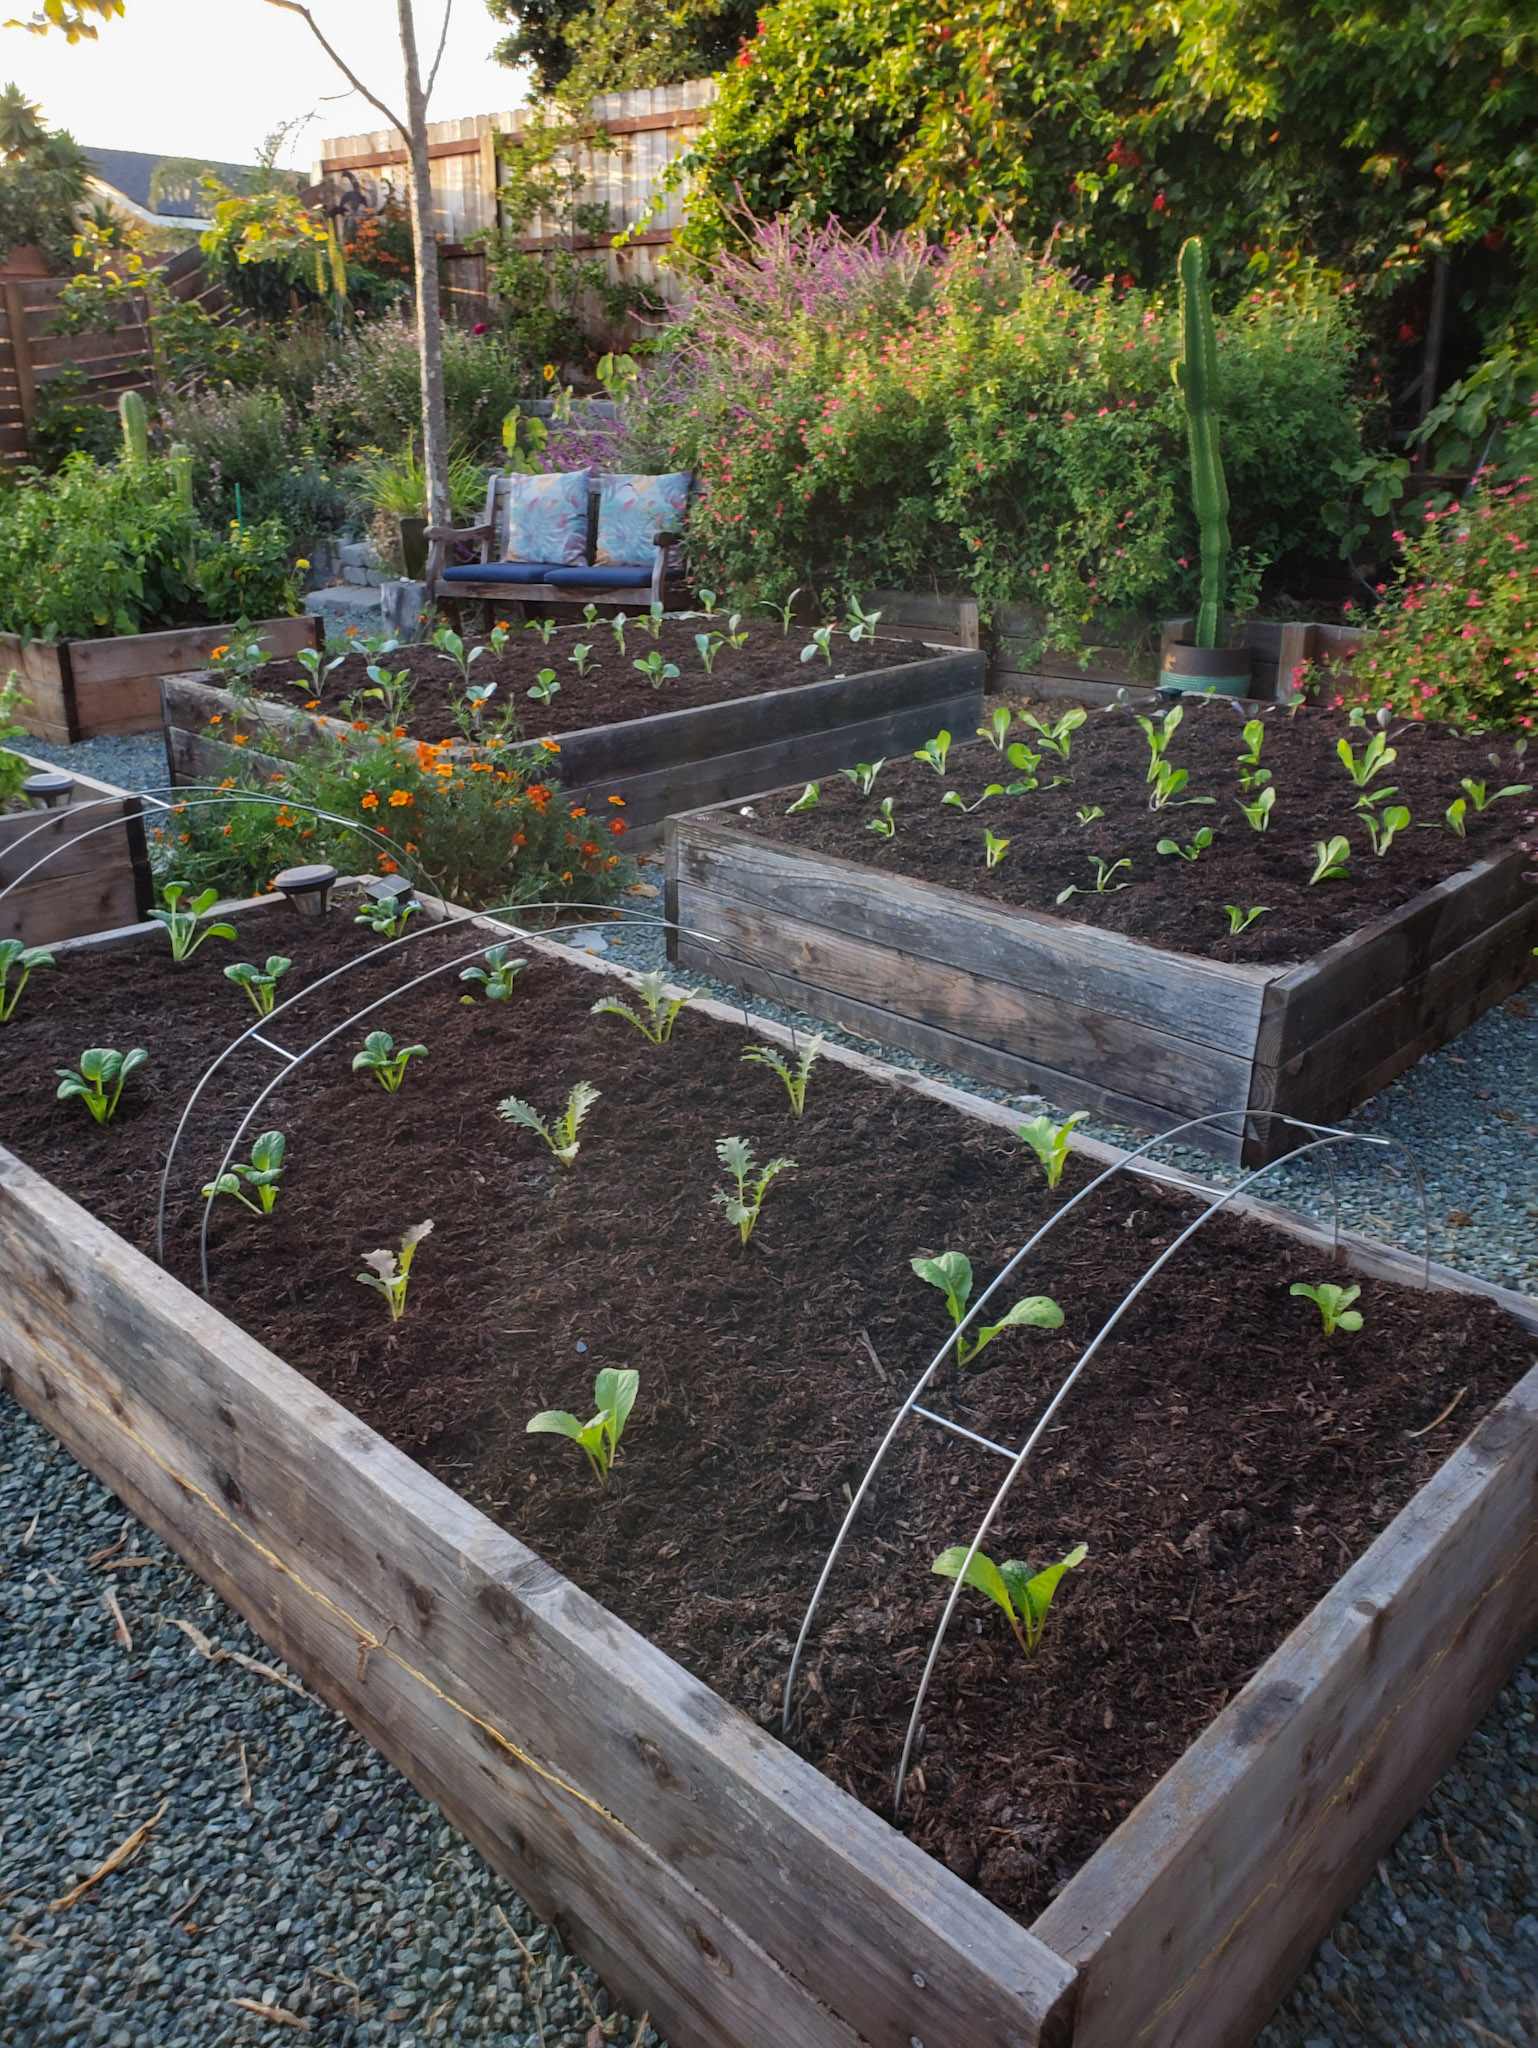 A number of raised garden beds are shown, each planted out with various tender seedlings and topped with woody compost mulch. Some of the beds have hoops attached to them which will be lined with row covers to keep pests out. There are various perennial flowering plants in the background along with cacti, vines, shrubs, and trees.